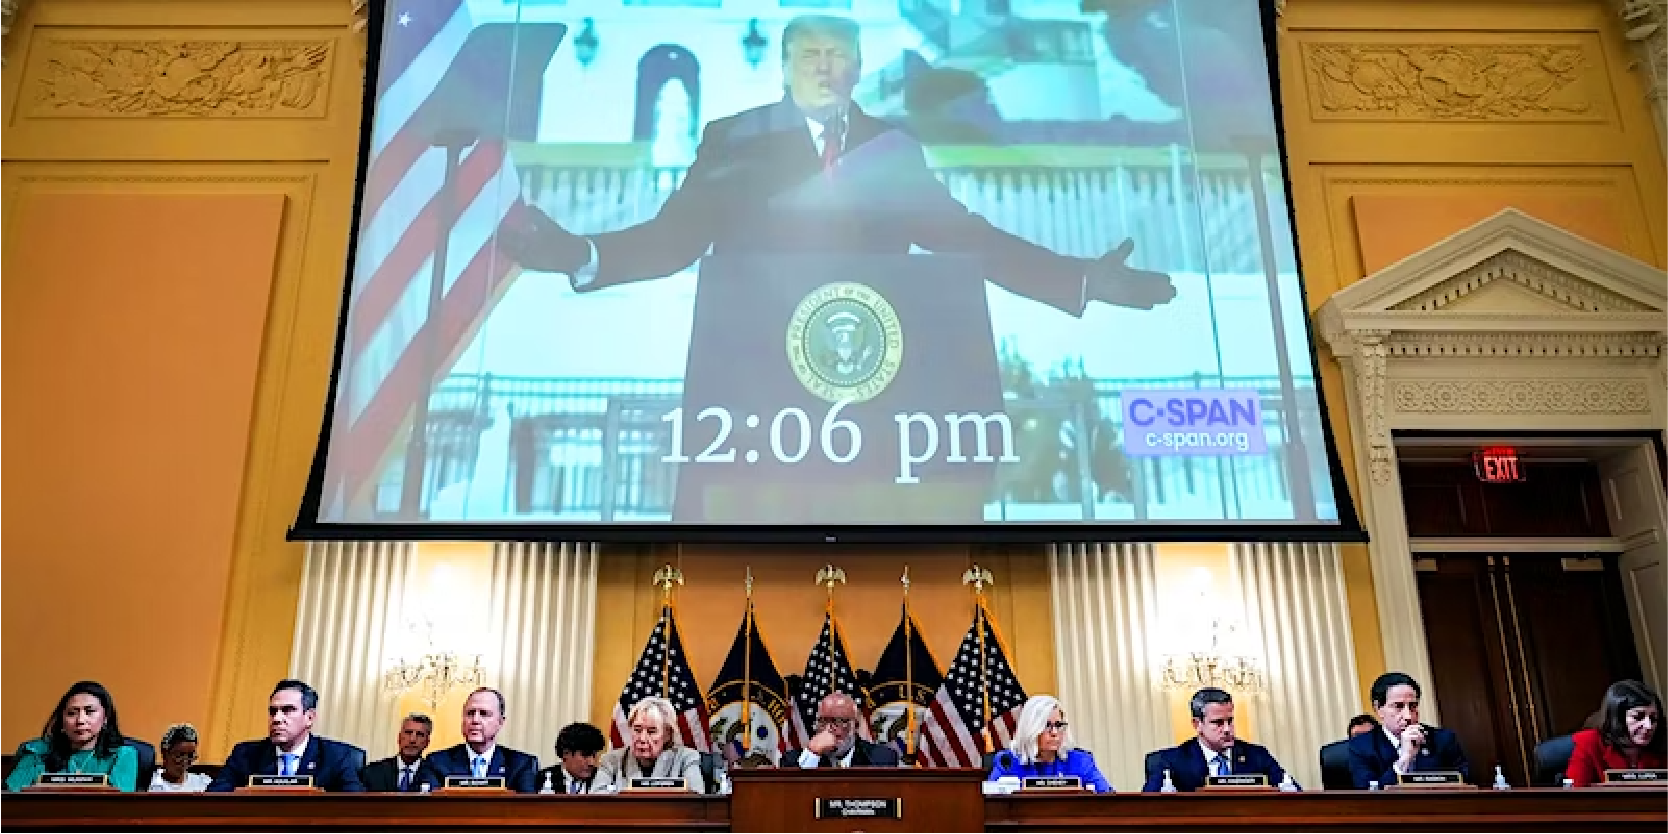 image of congress with trump on screen in background